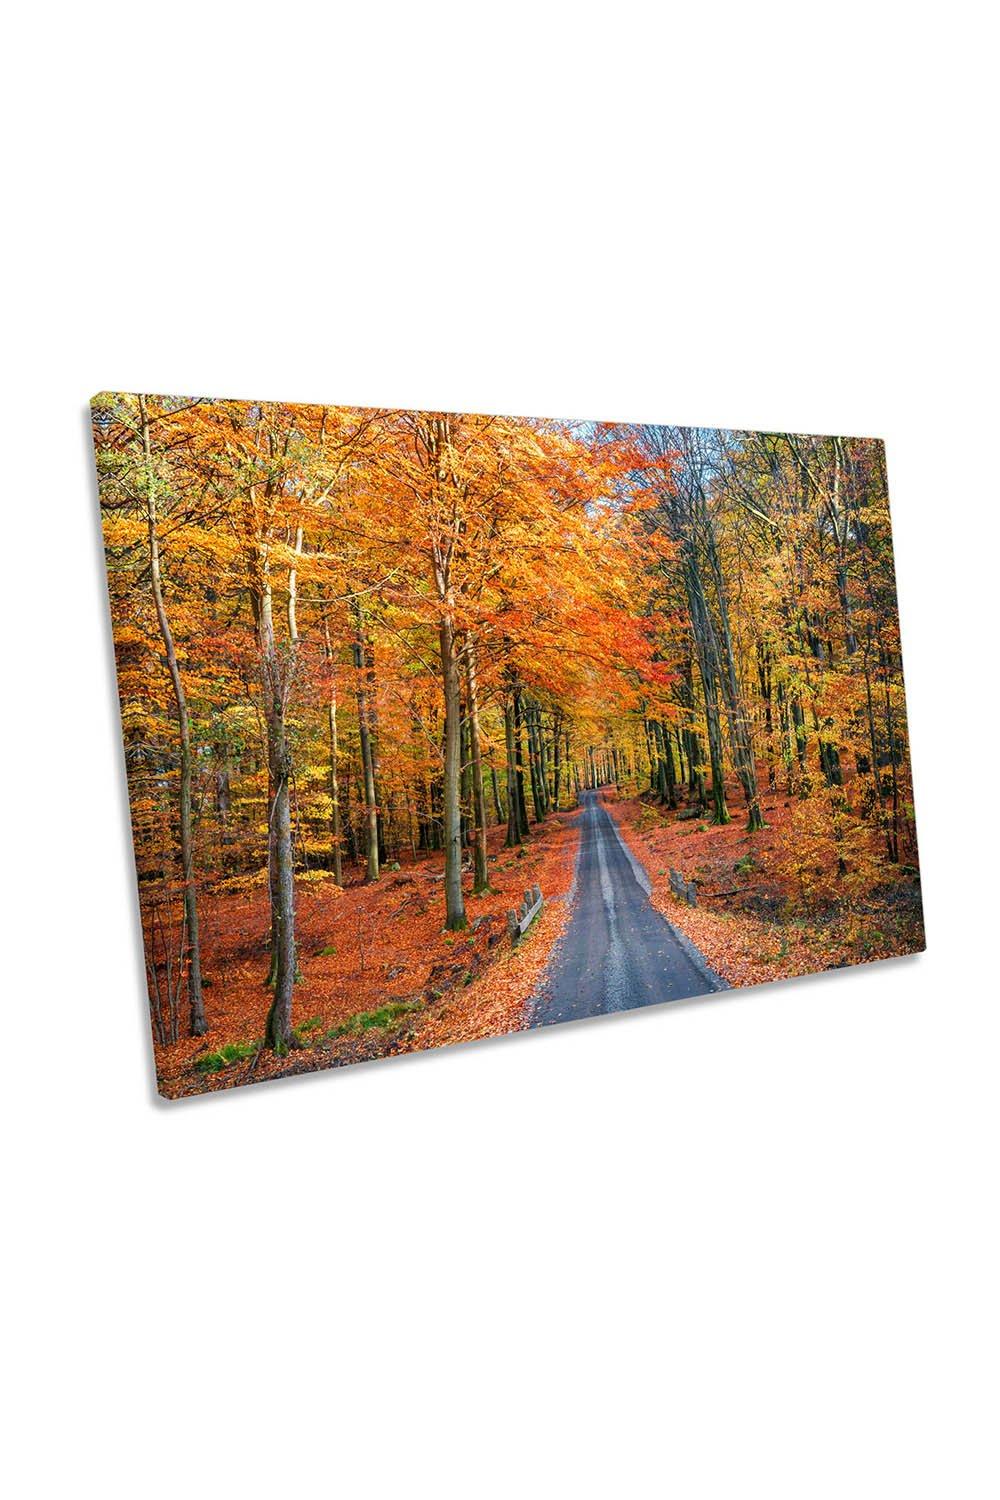 Road into Autumn Forest Orange Canvas Wall Art Picture Print